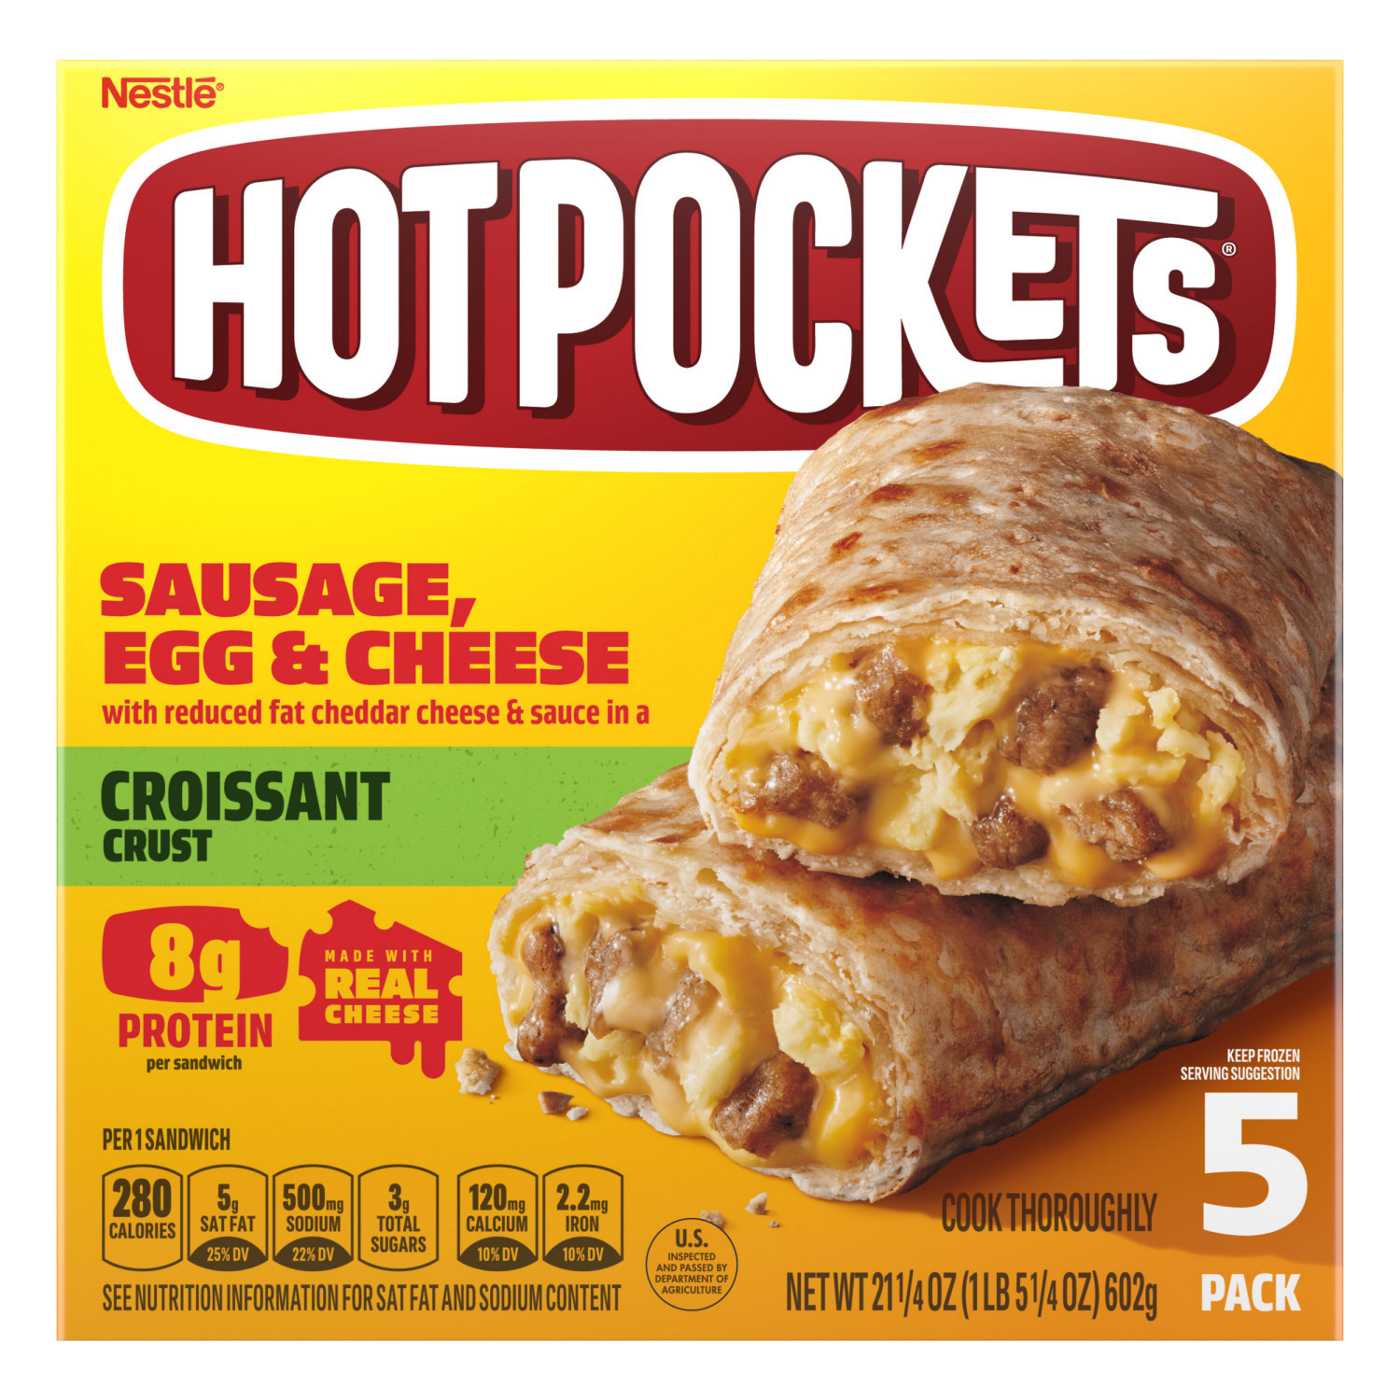 Hot Pockets Sausage Egg & Cheese Croissant Crust Frozen Sandwiches; image 1 of 8